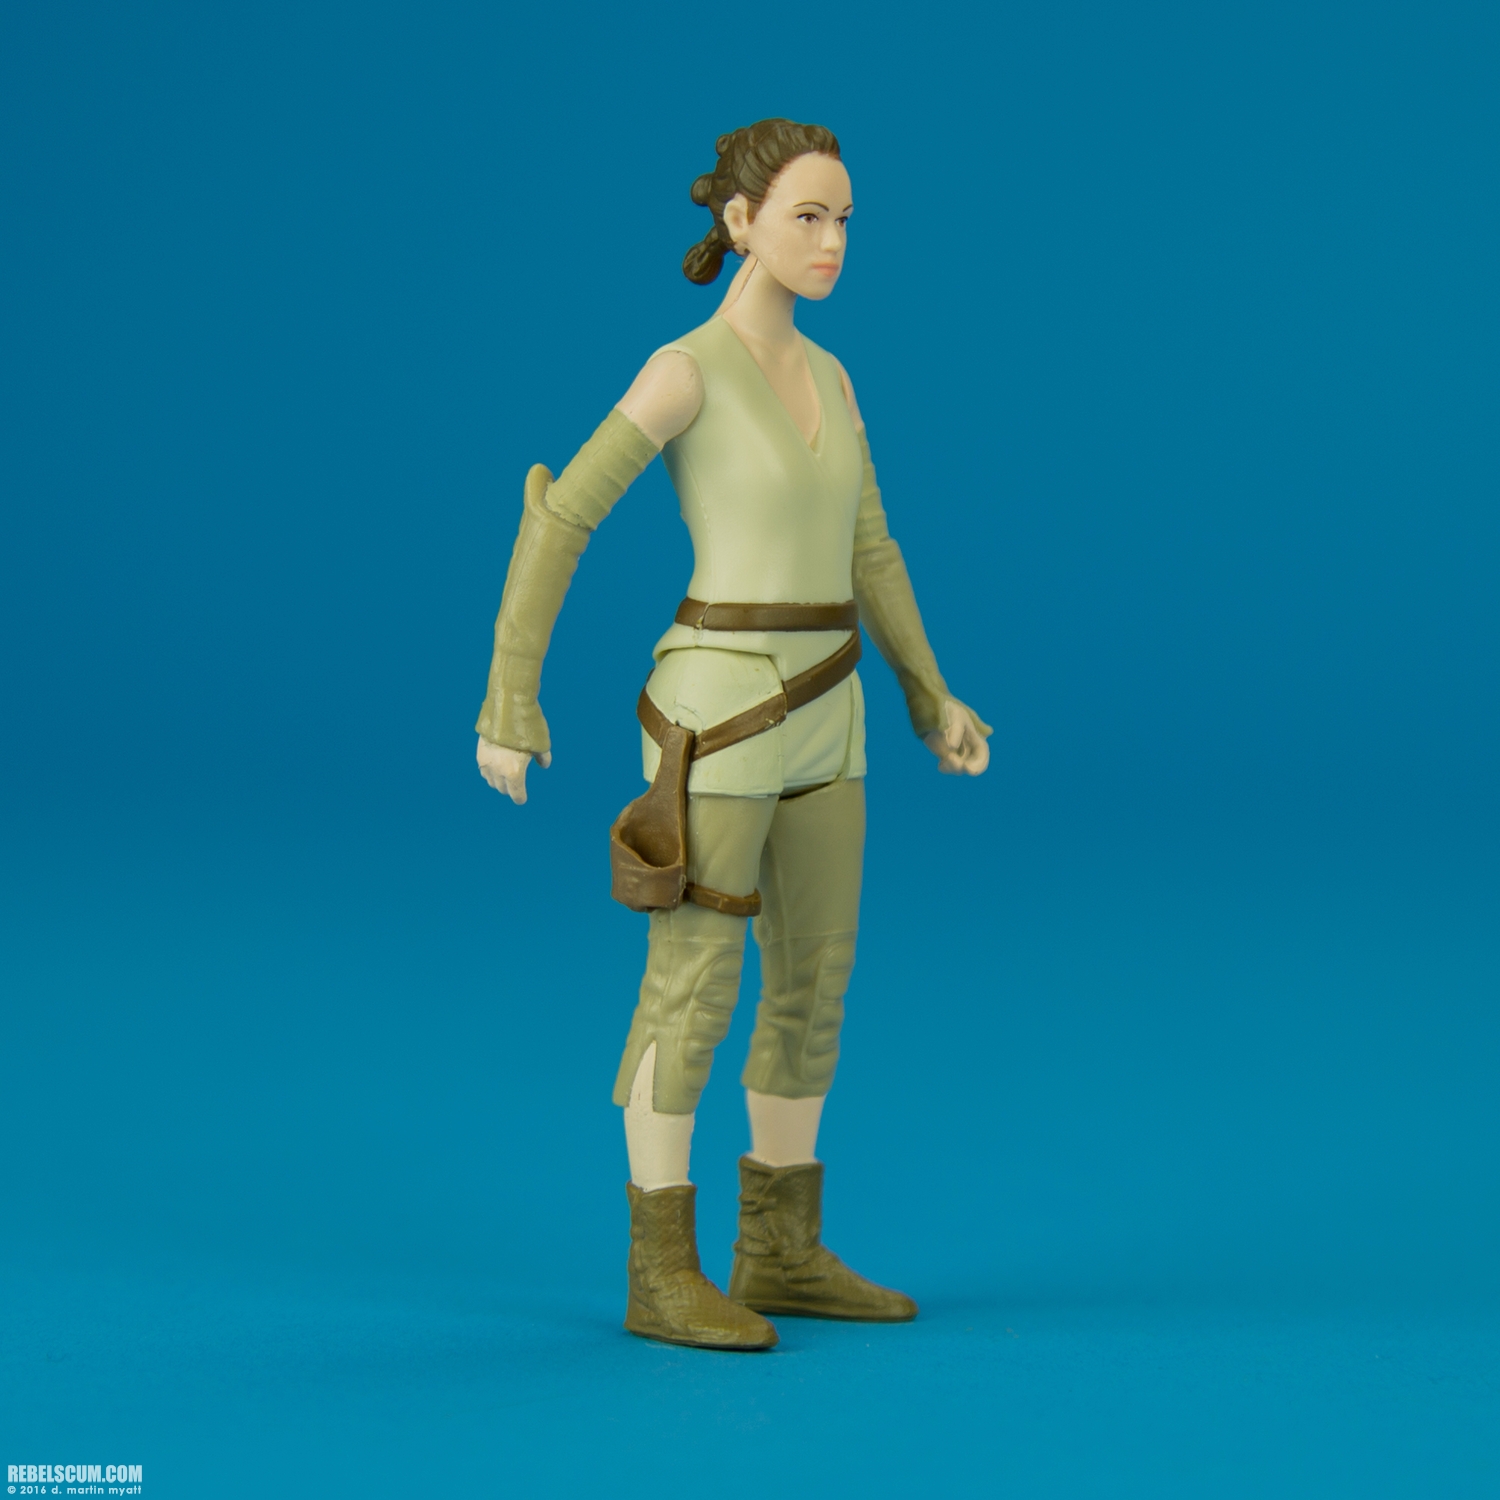 Rey-Resistance-Outfit-The-Force-Awakens-2016-Hasbro-006.jpg